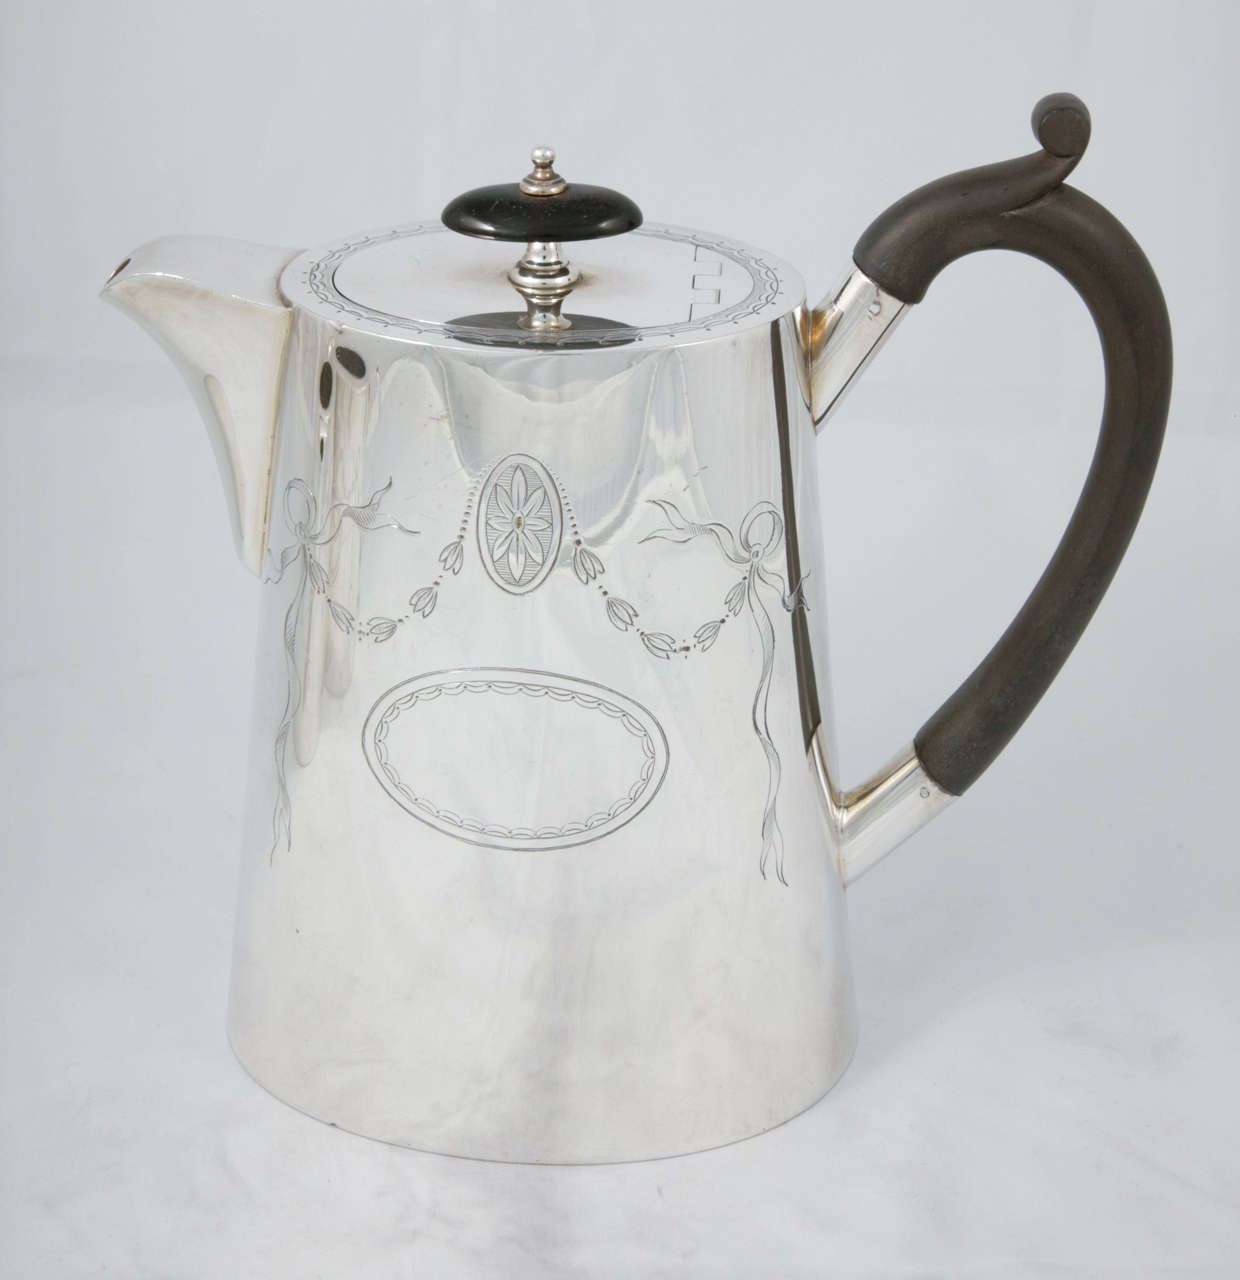 Silver plated  three piece coffee set, circa 1890. 
Milk Jug: W14 x D7 x H9 cm
Auxiliar Jug: W18 x D8.3 x H8.5cm

Please contact us for shipping costs.